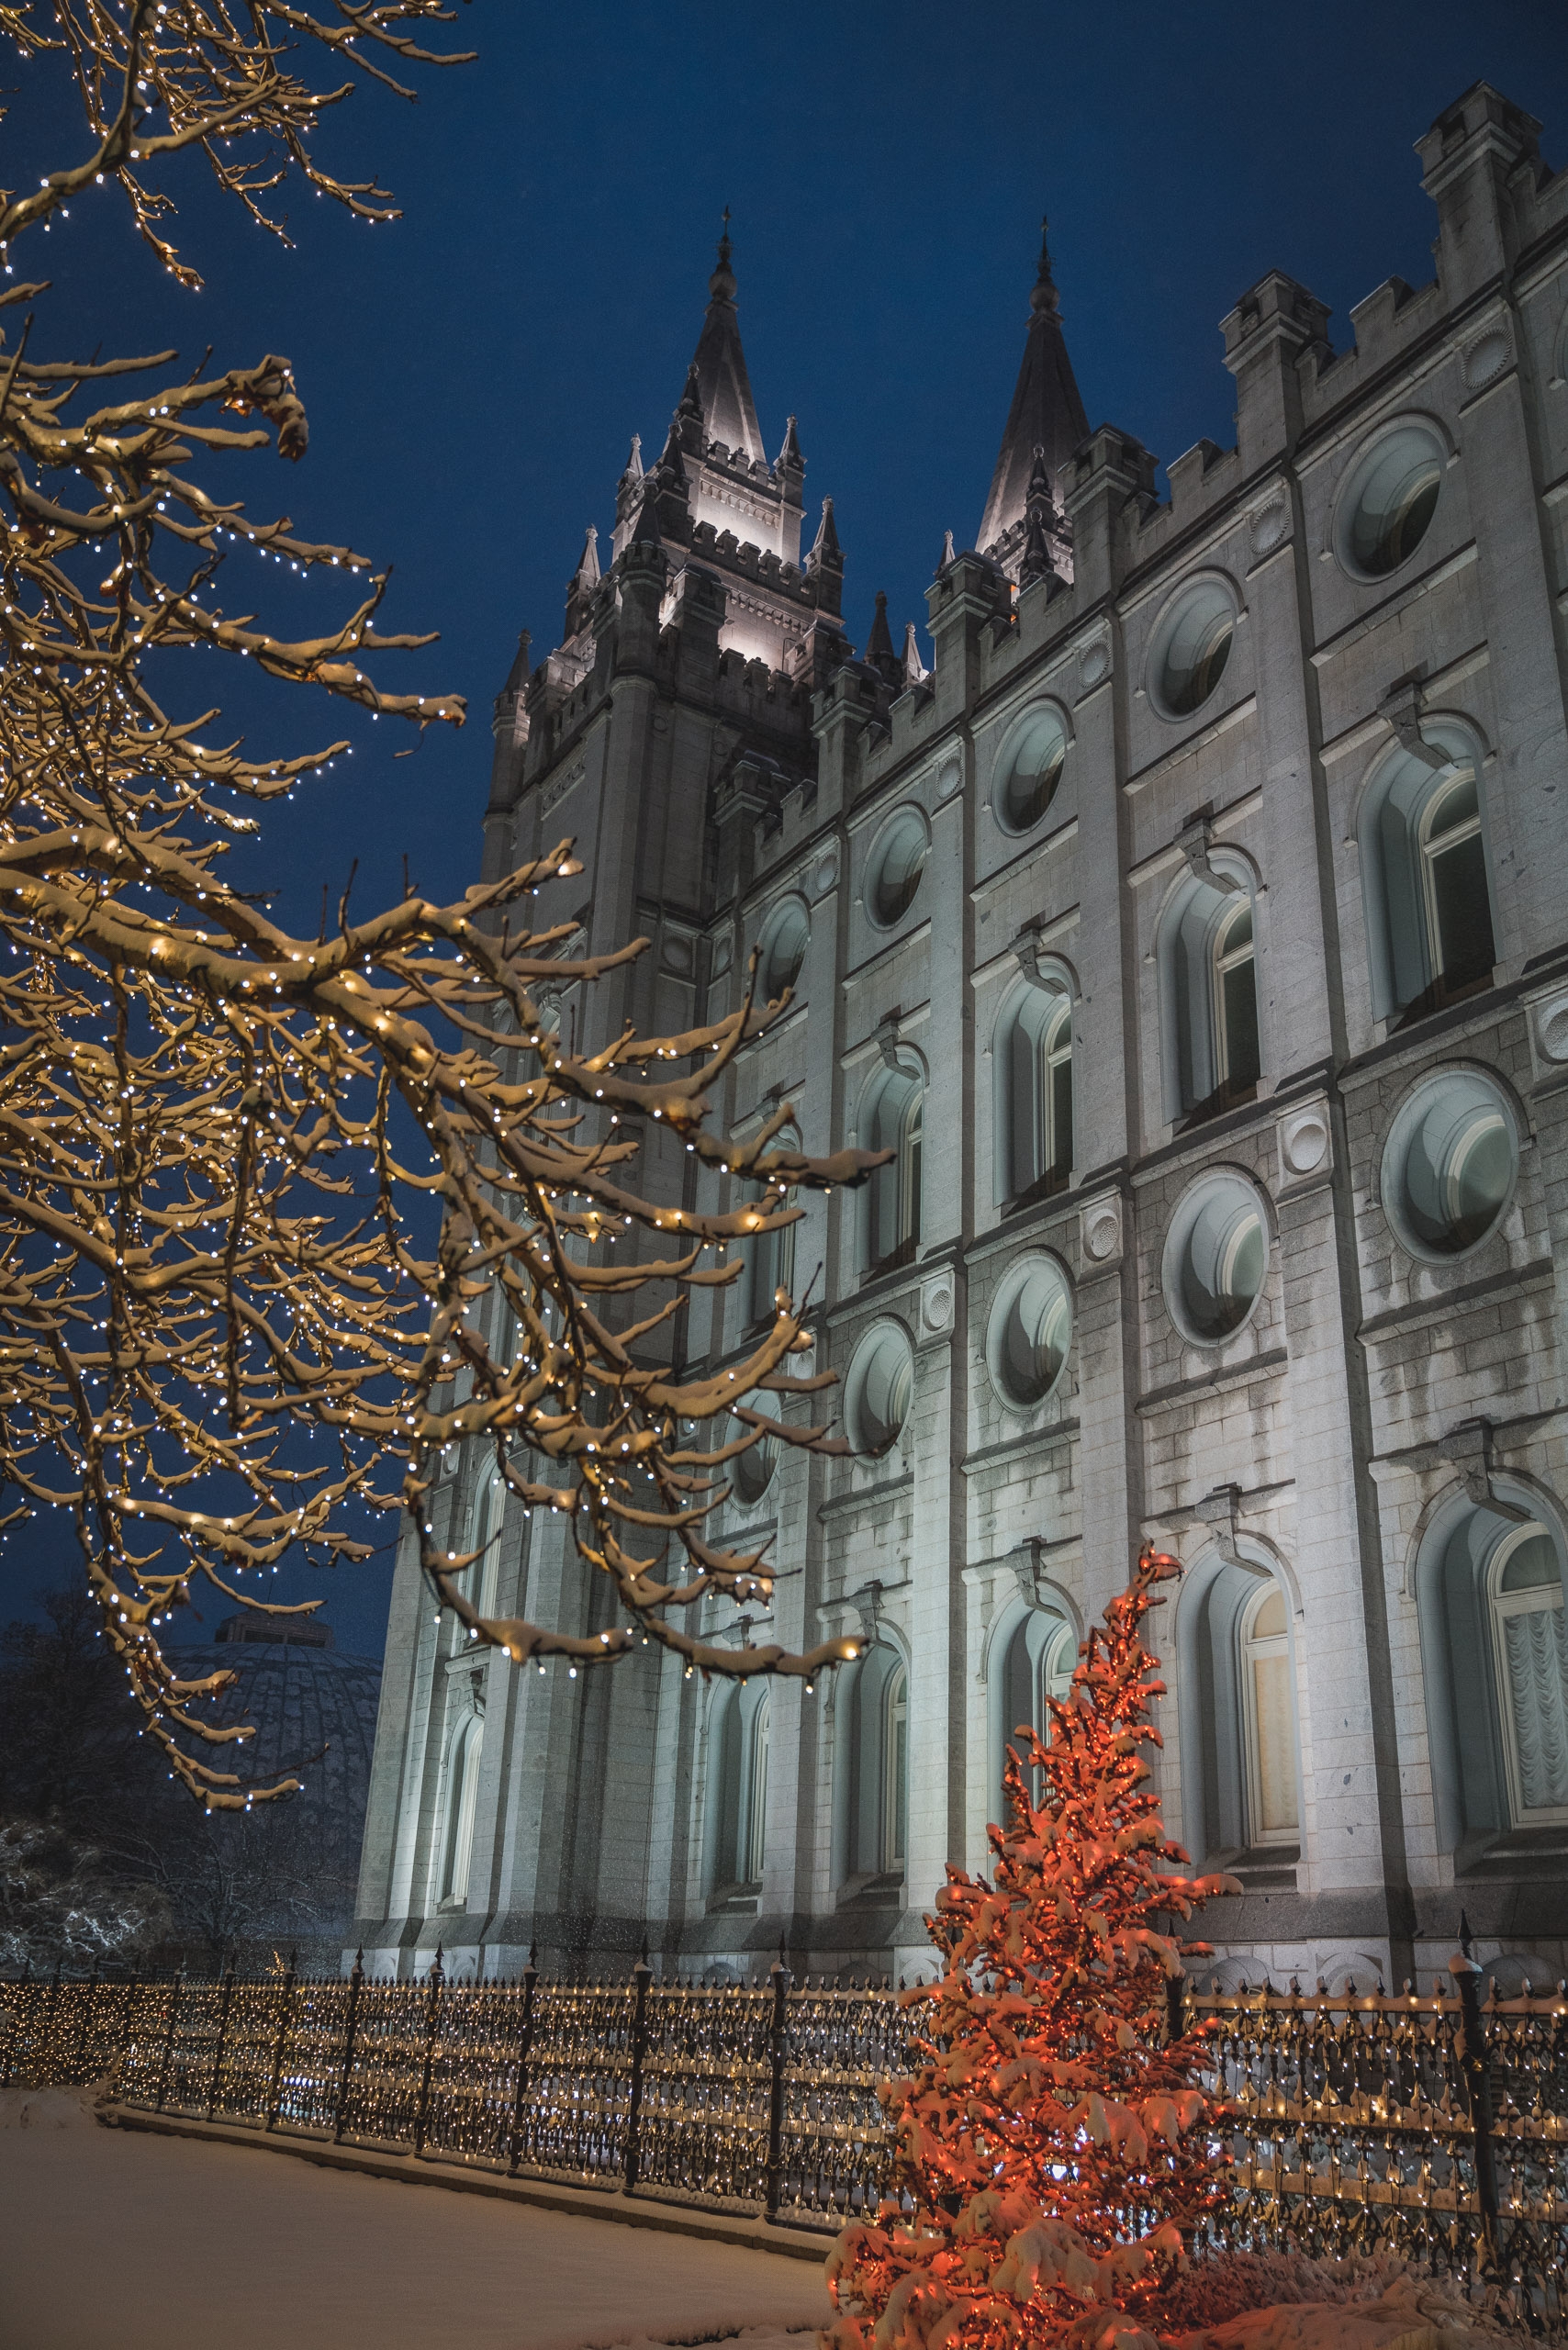 Temple Square at Night